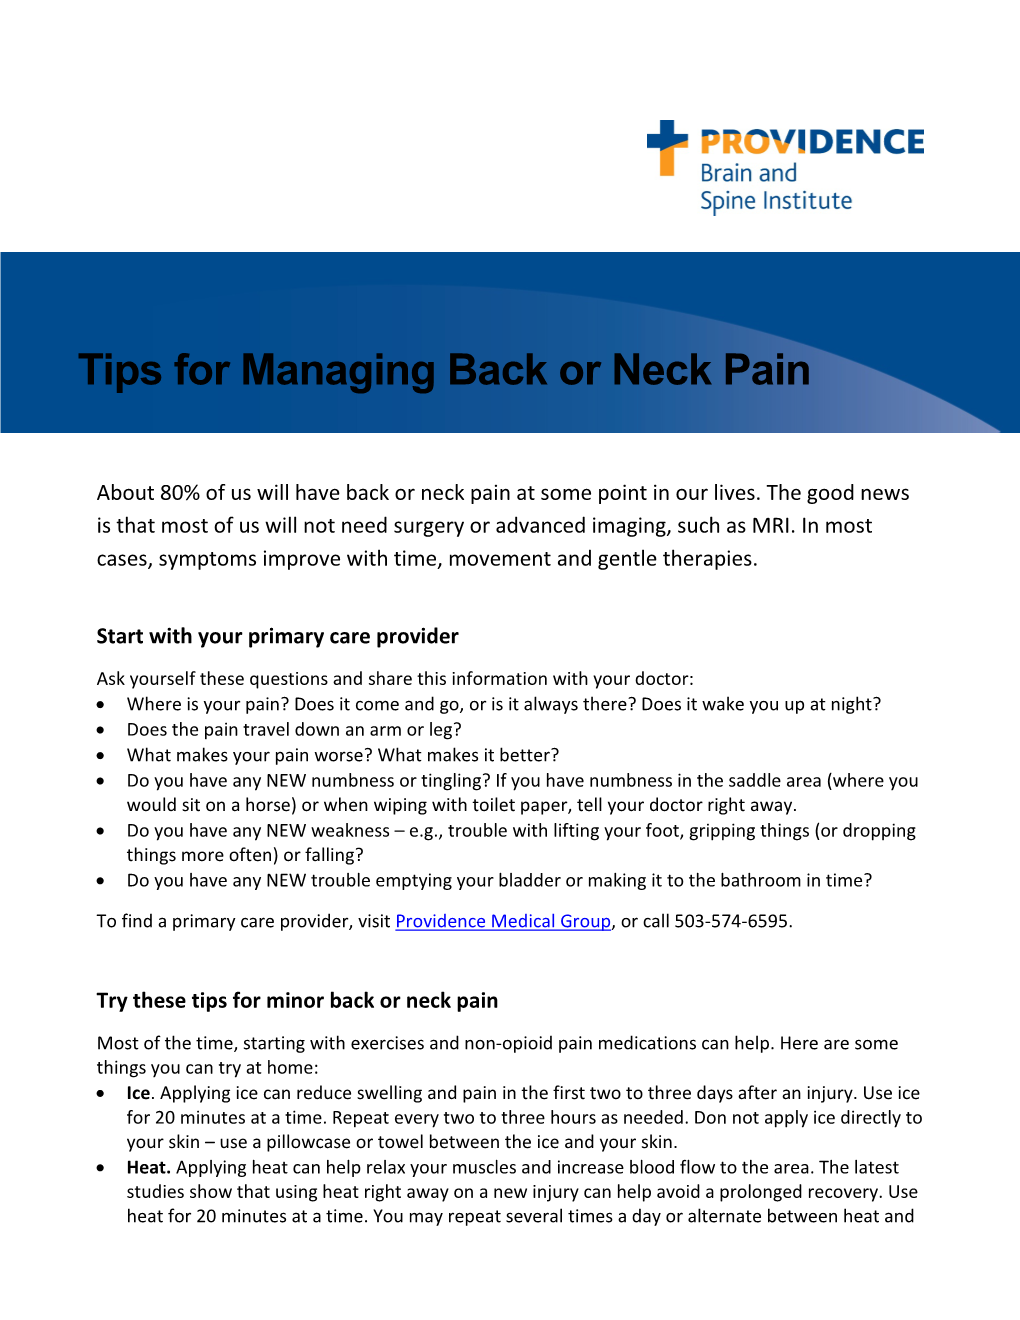 Tips for Managing Back Or Neck Pain